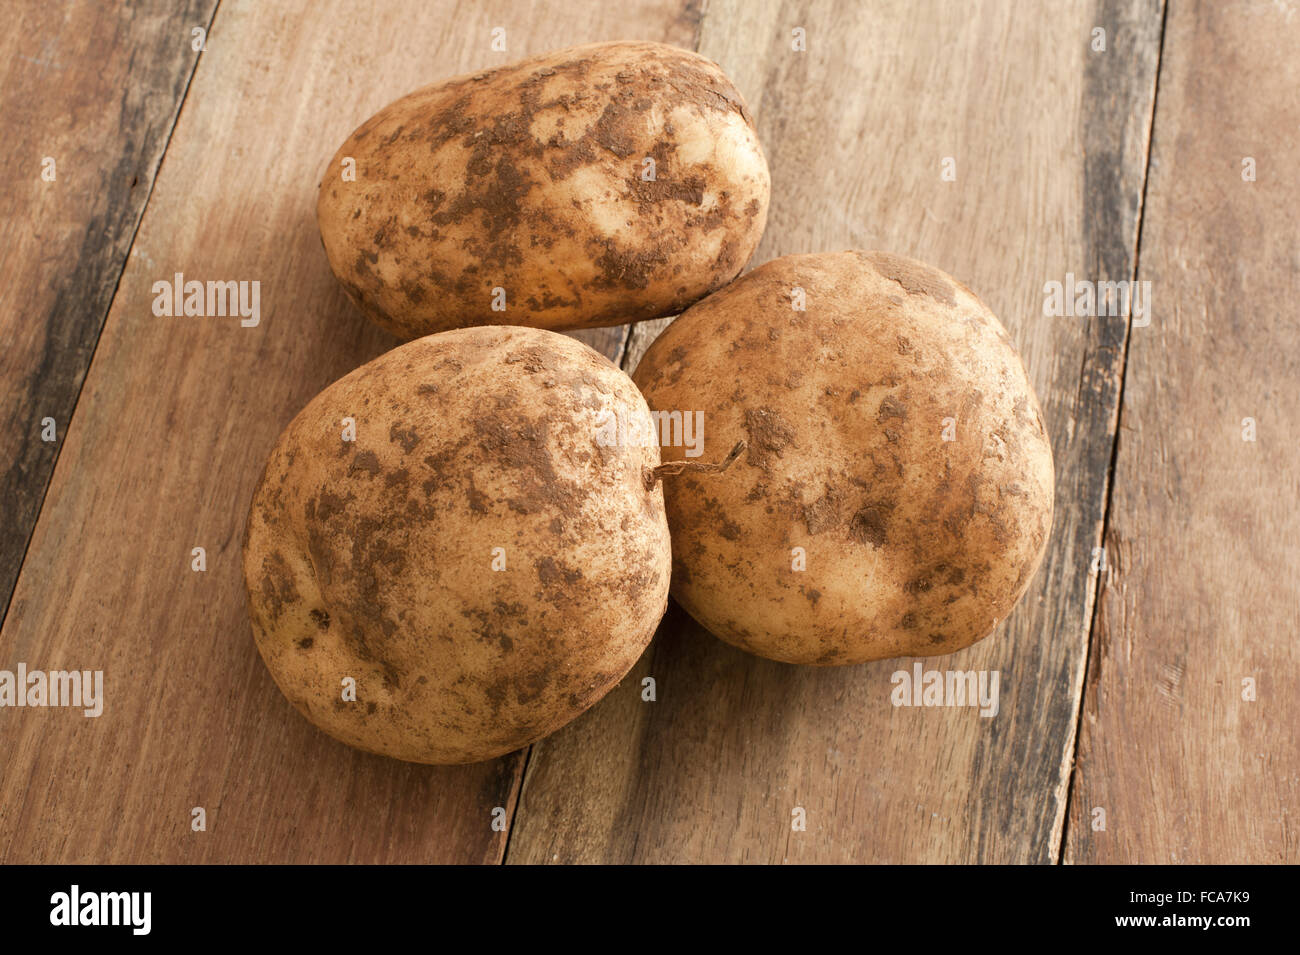 Three Unwashed Potatoes on a Wooden Table Stock Photo